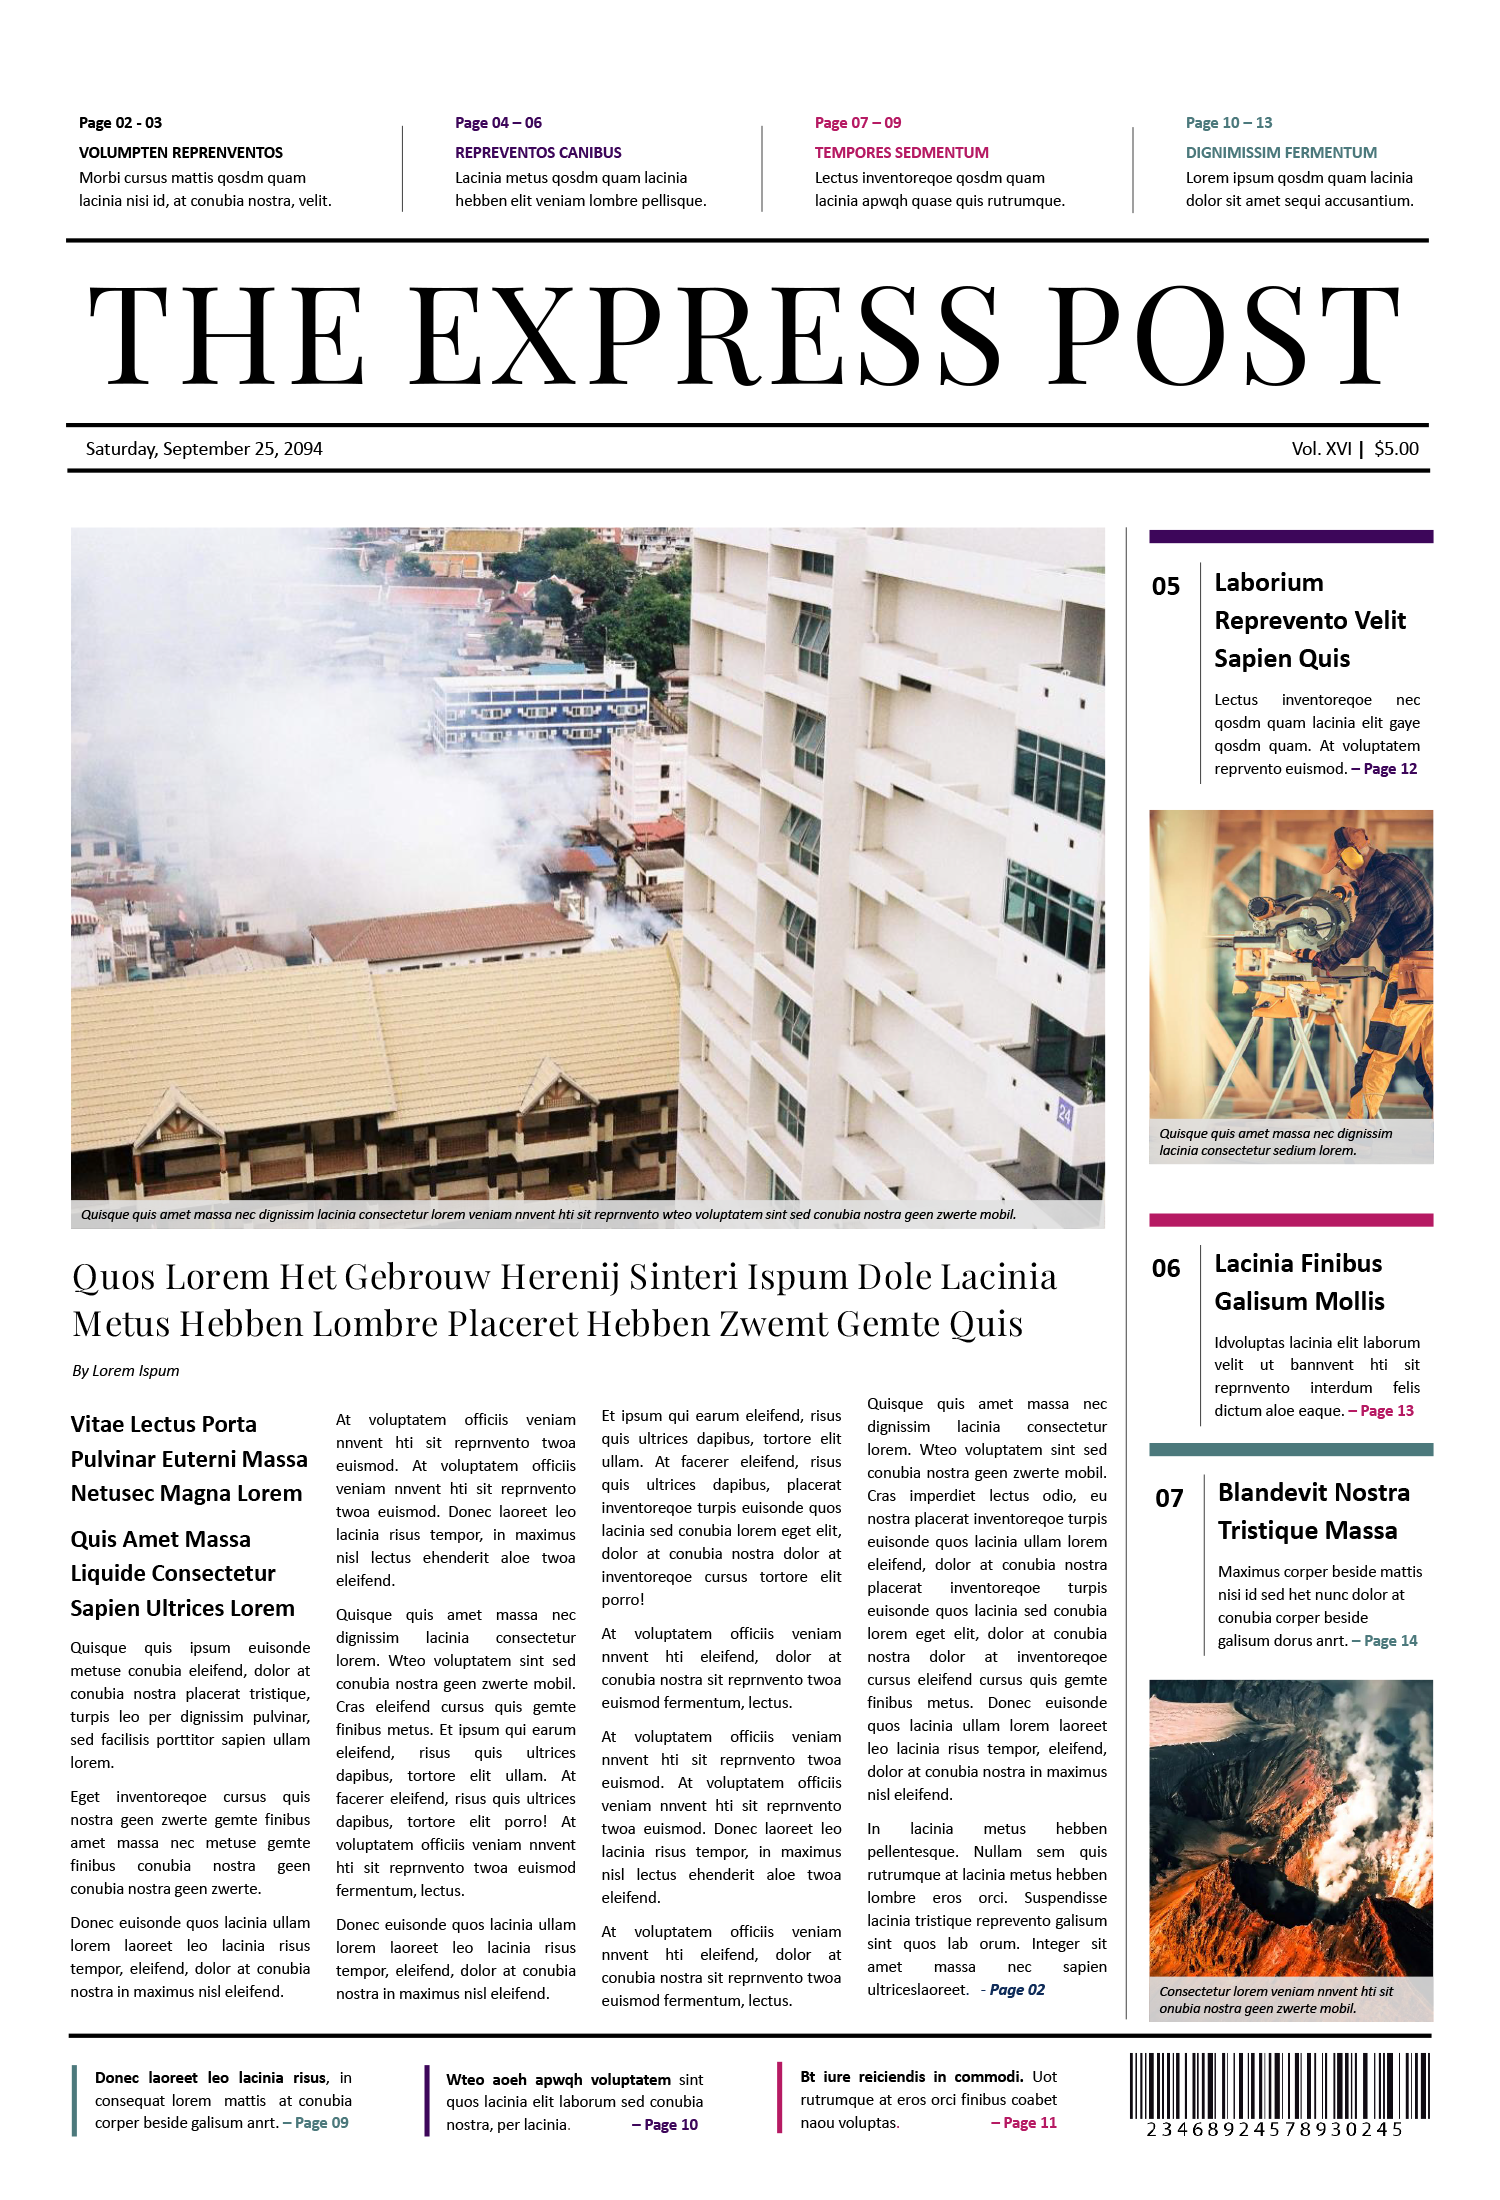 Broadsheet Newspaper Layout - Front Page Template - Front Page